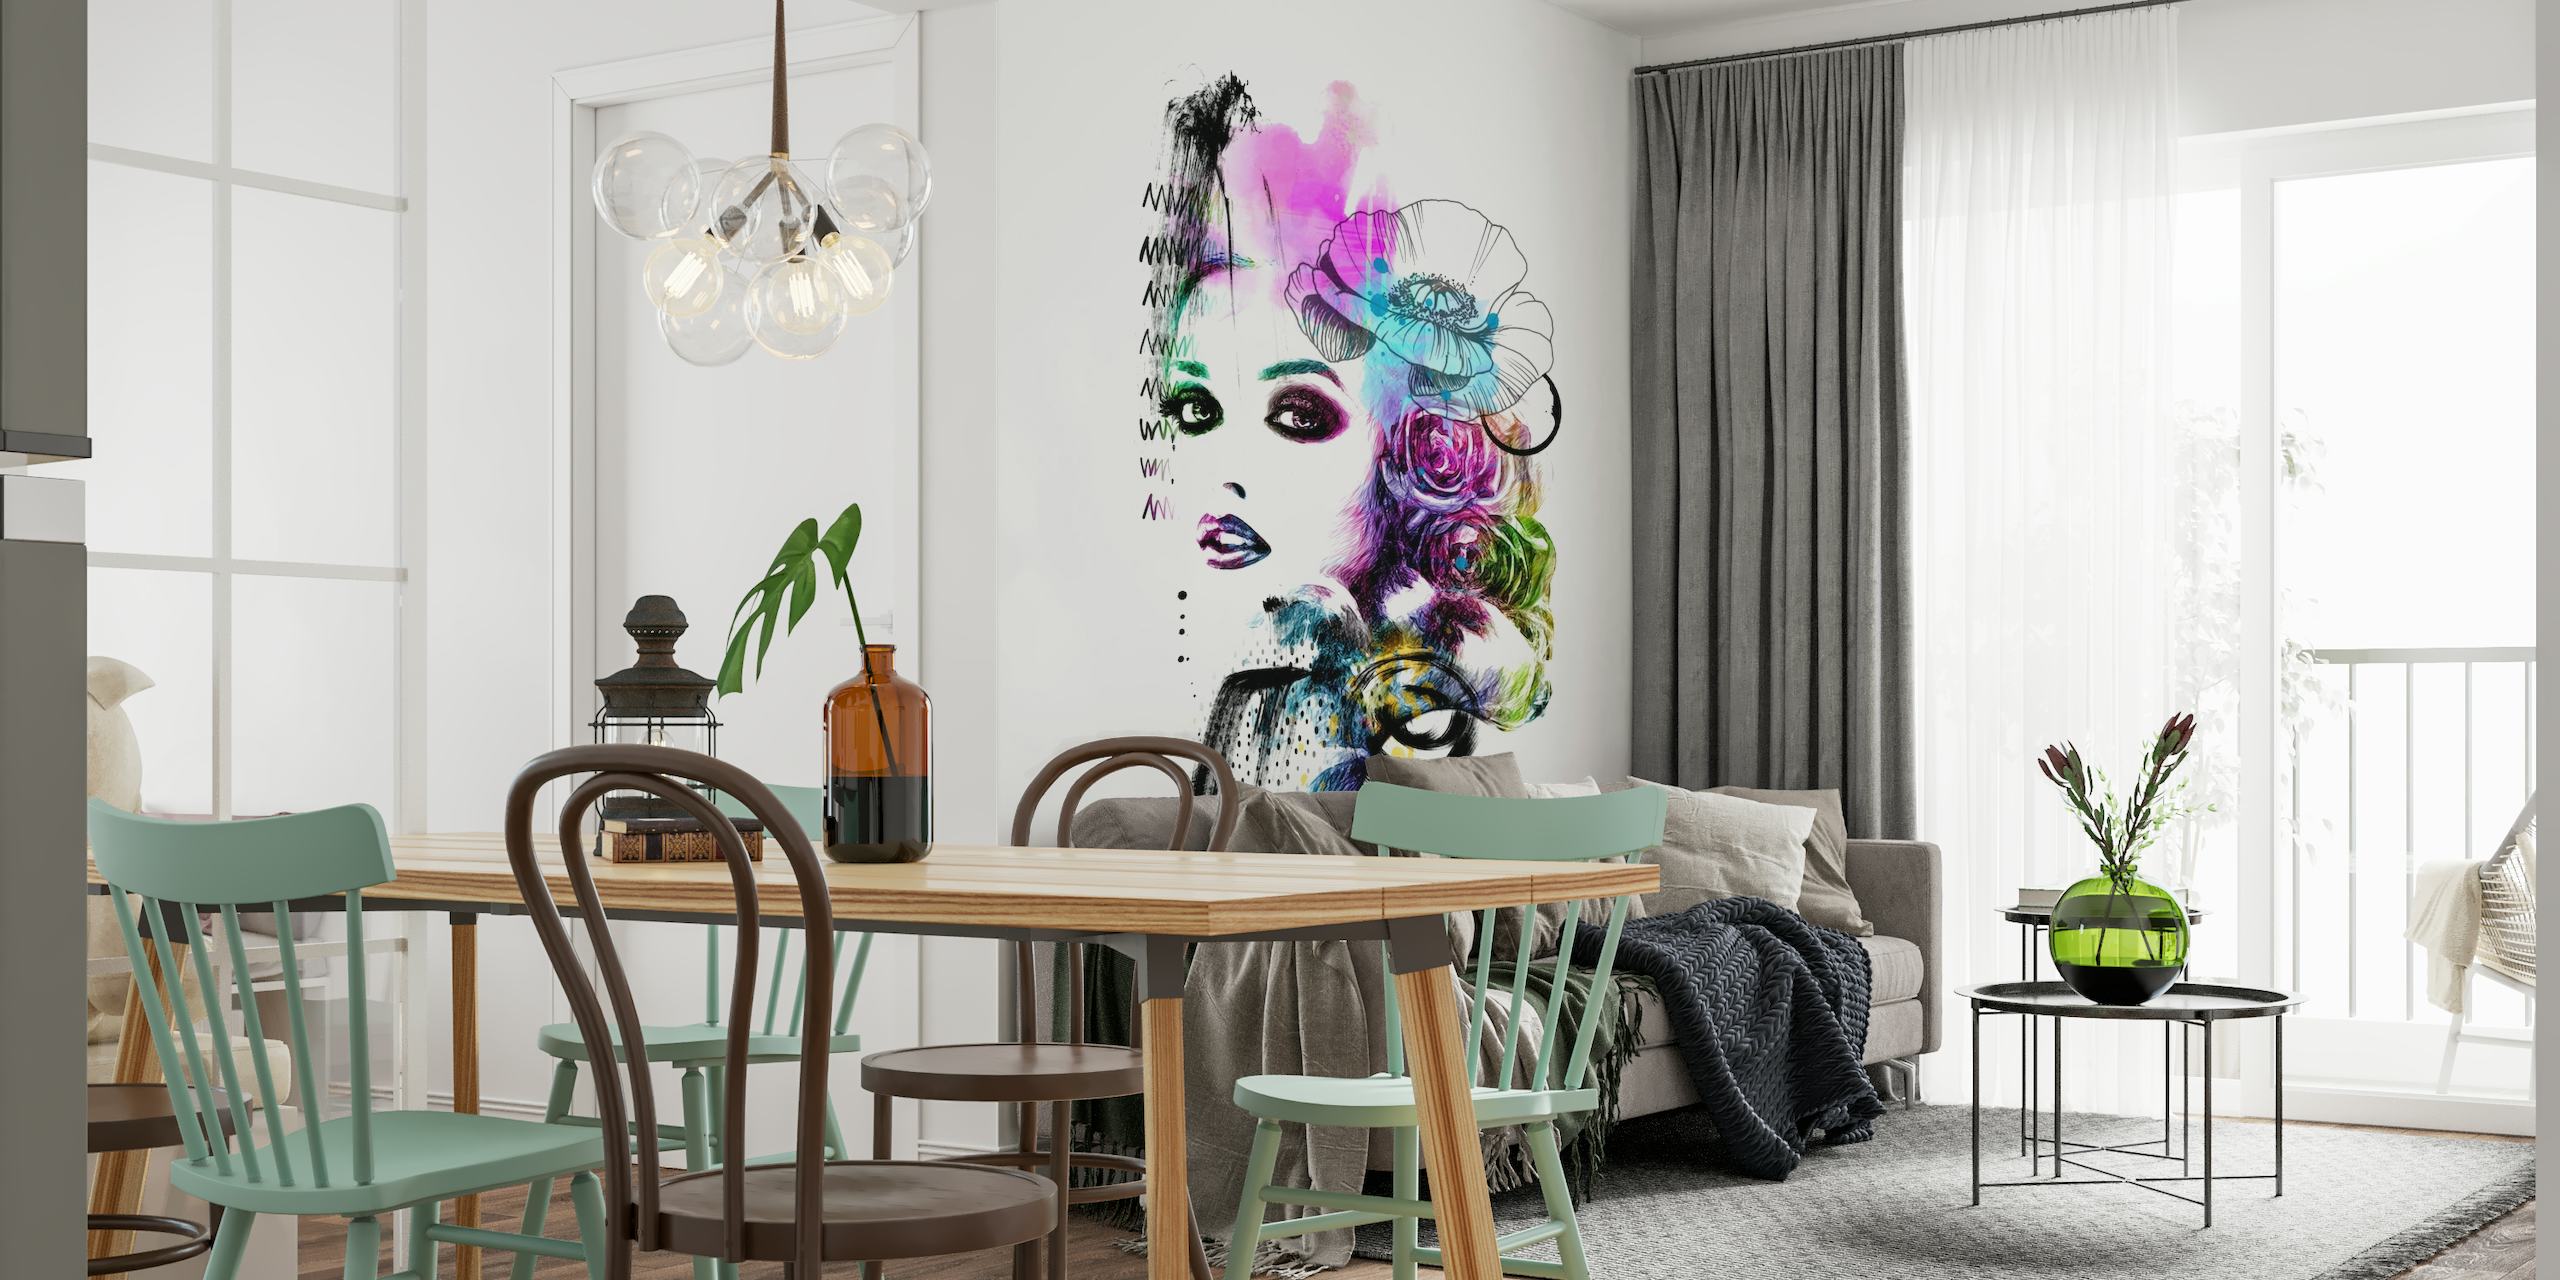 Artistic Flower Lady Portrait wall mural with vibrant watercolors and floral design